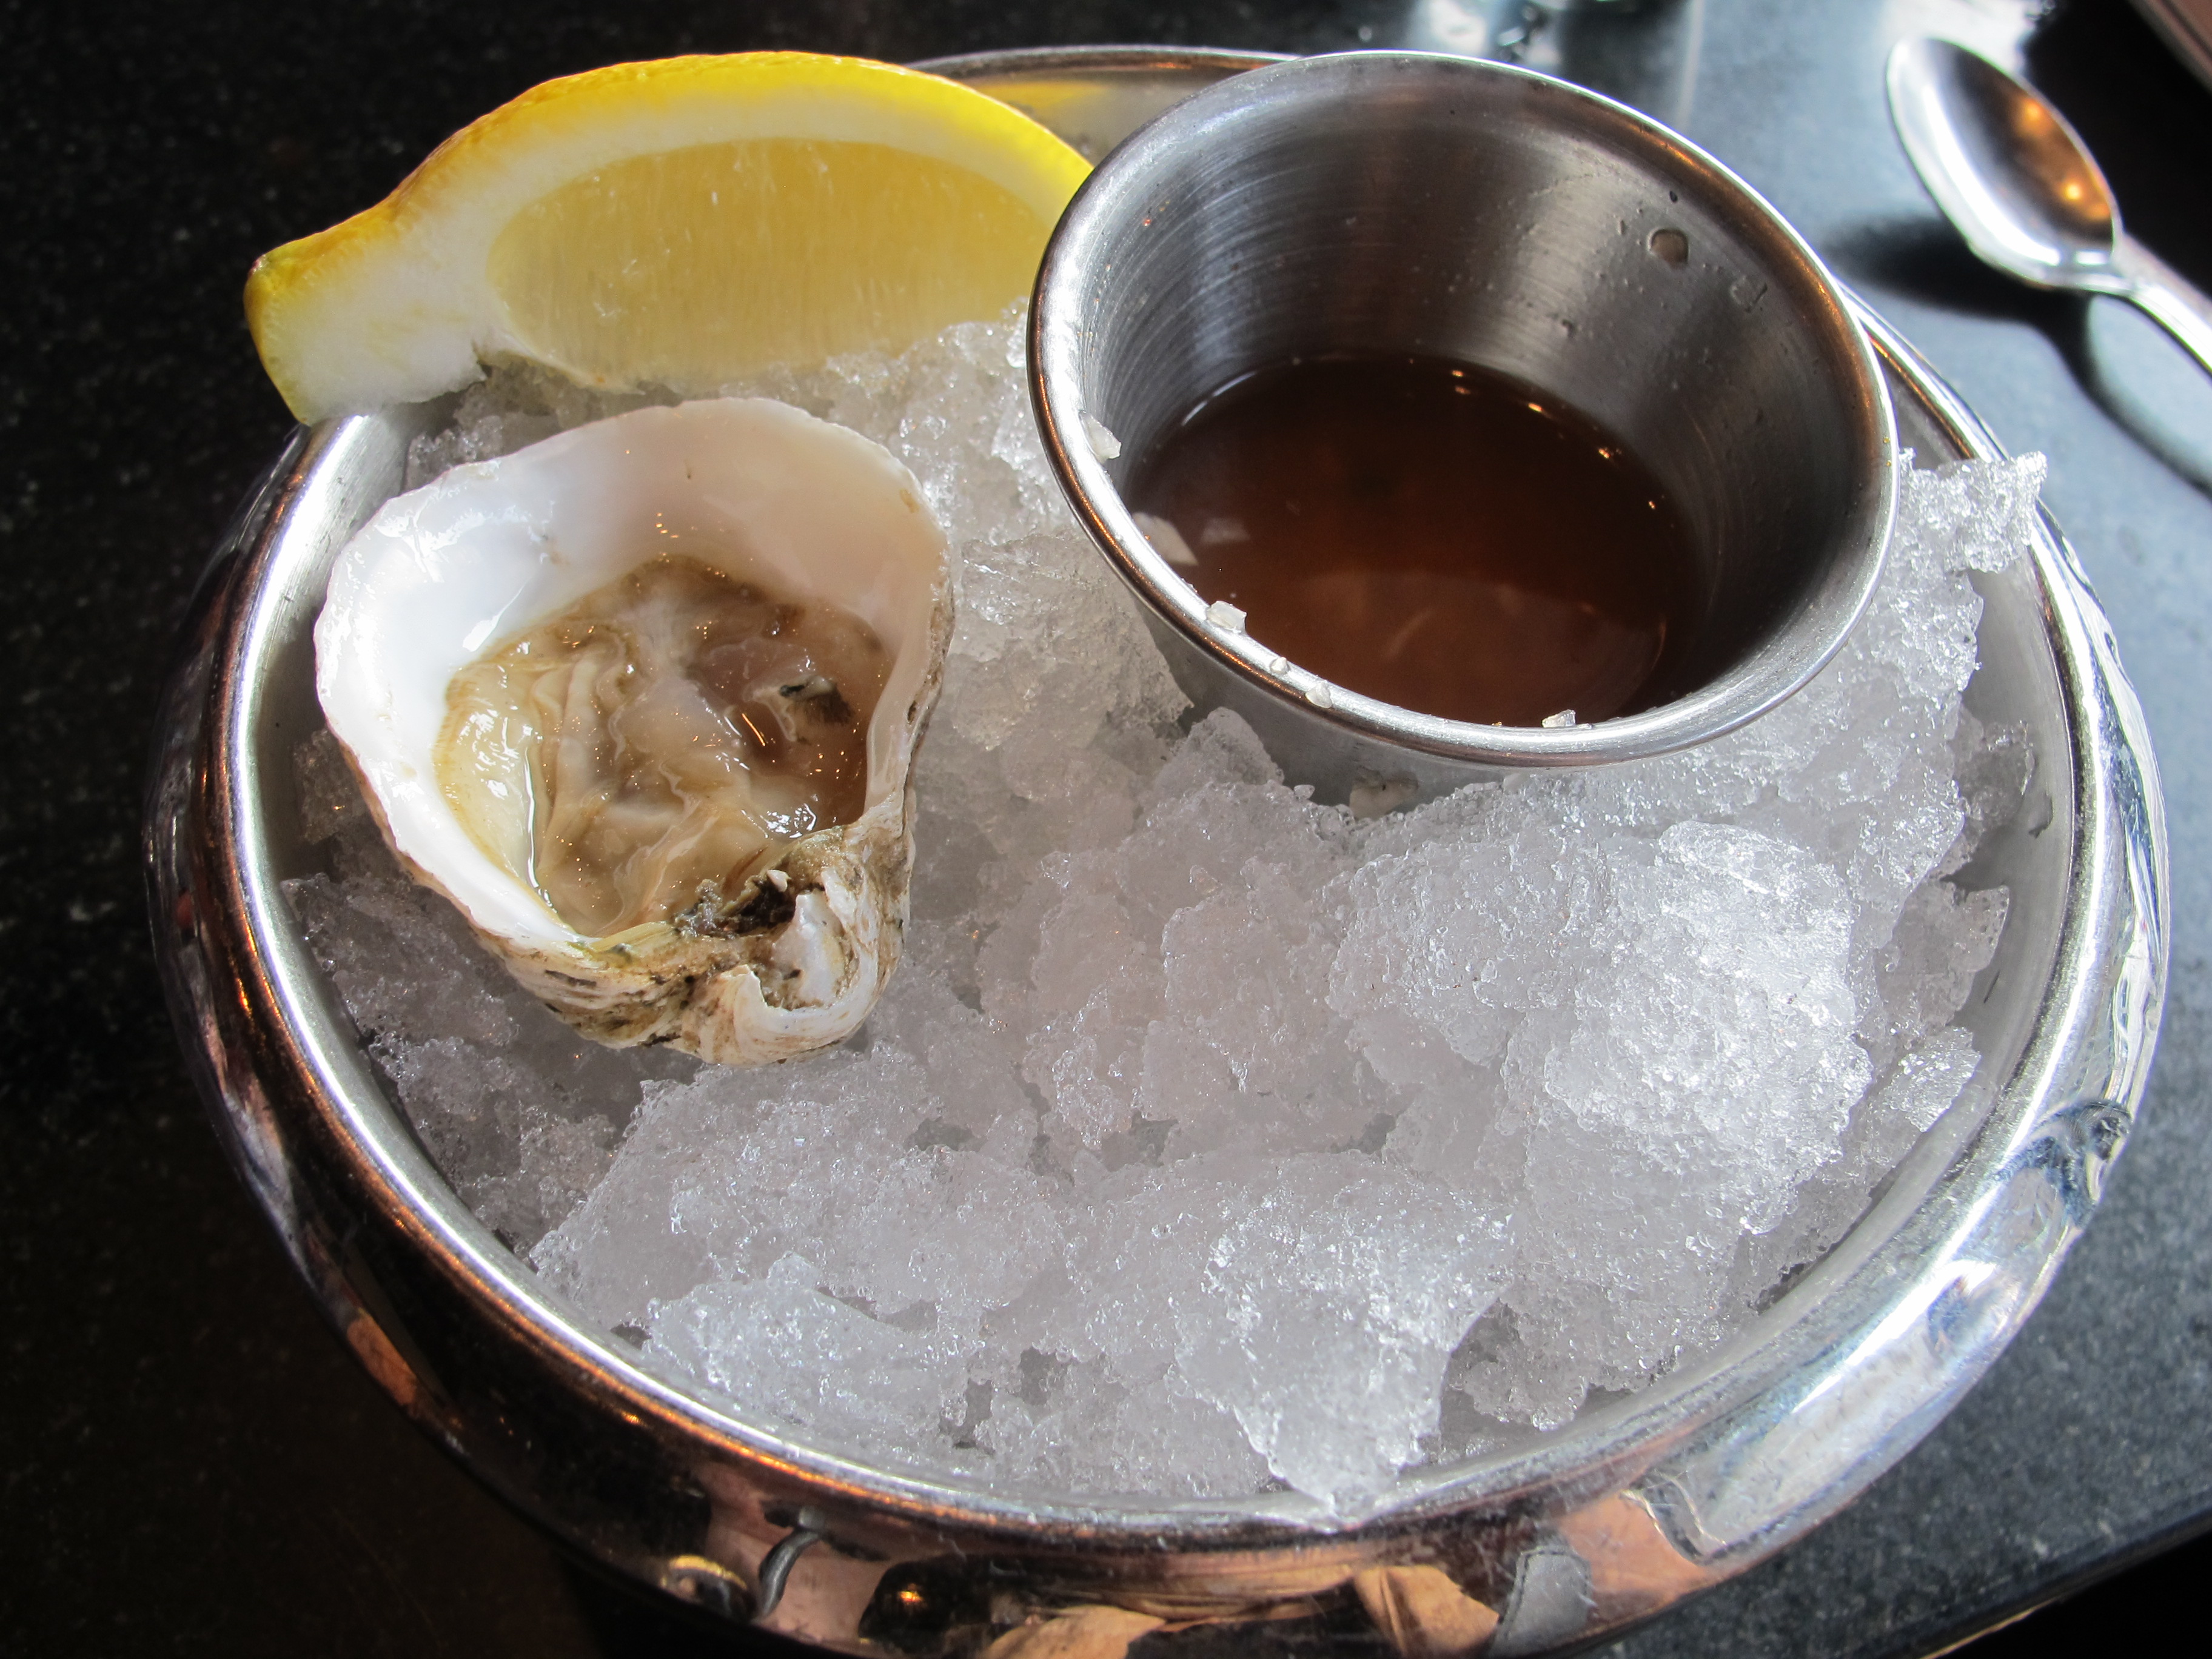 Kusshi oyster